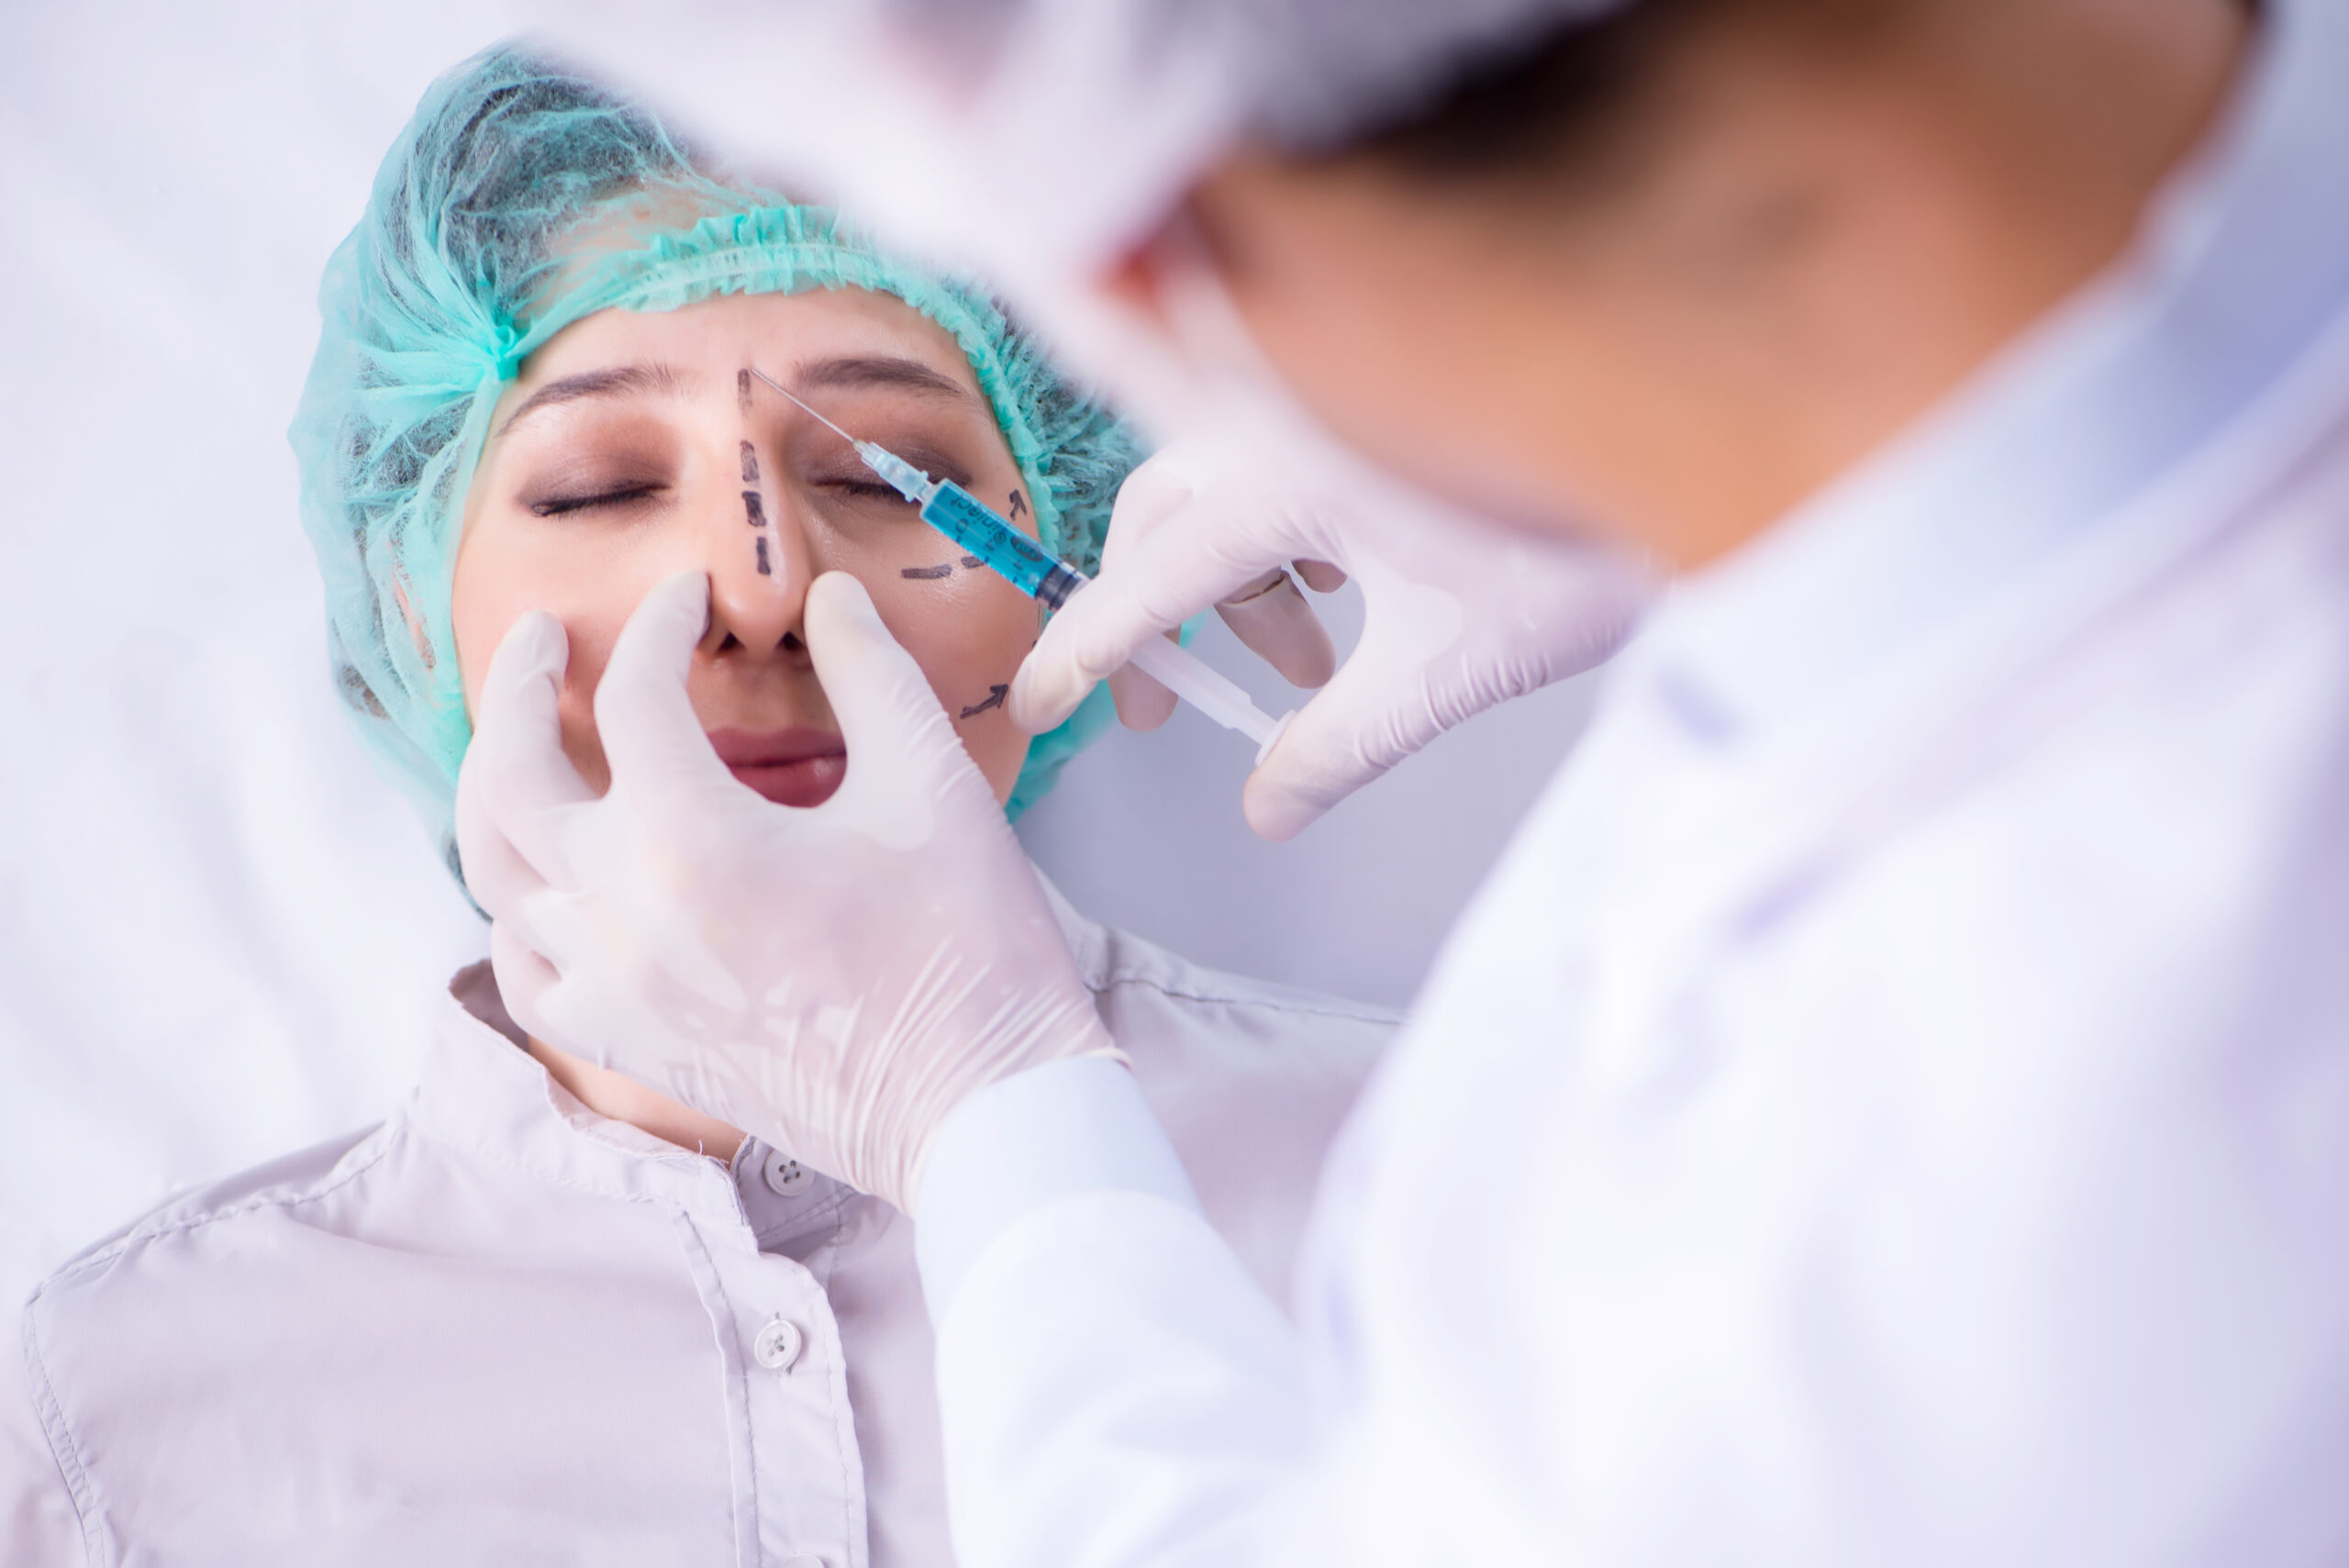 Non-Surgical Rhinoplasty Training for RNs and NPs